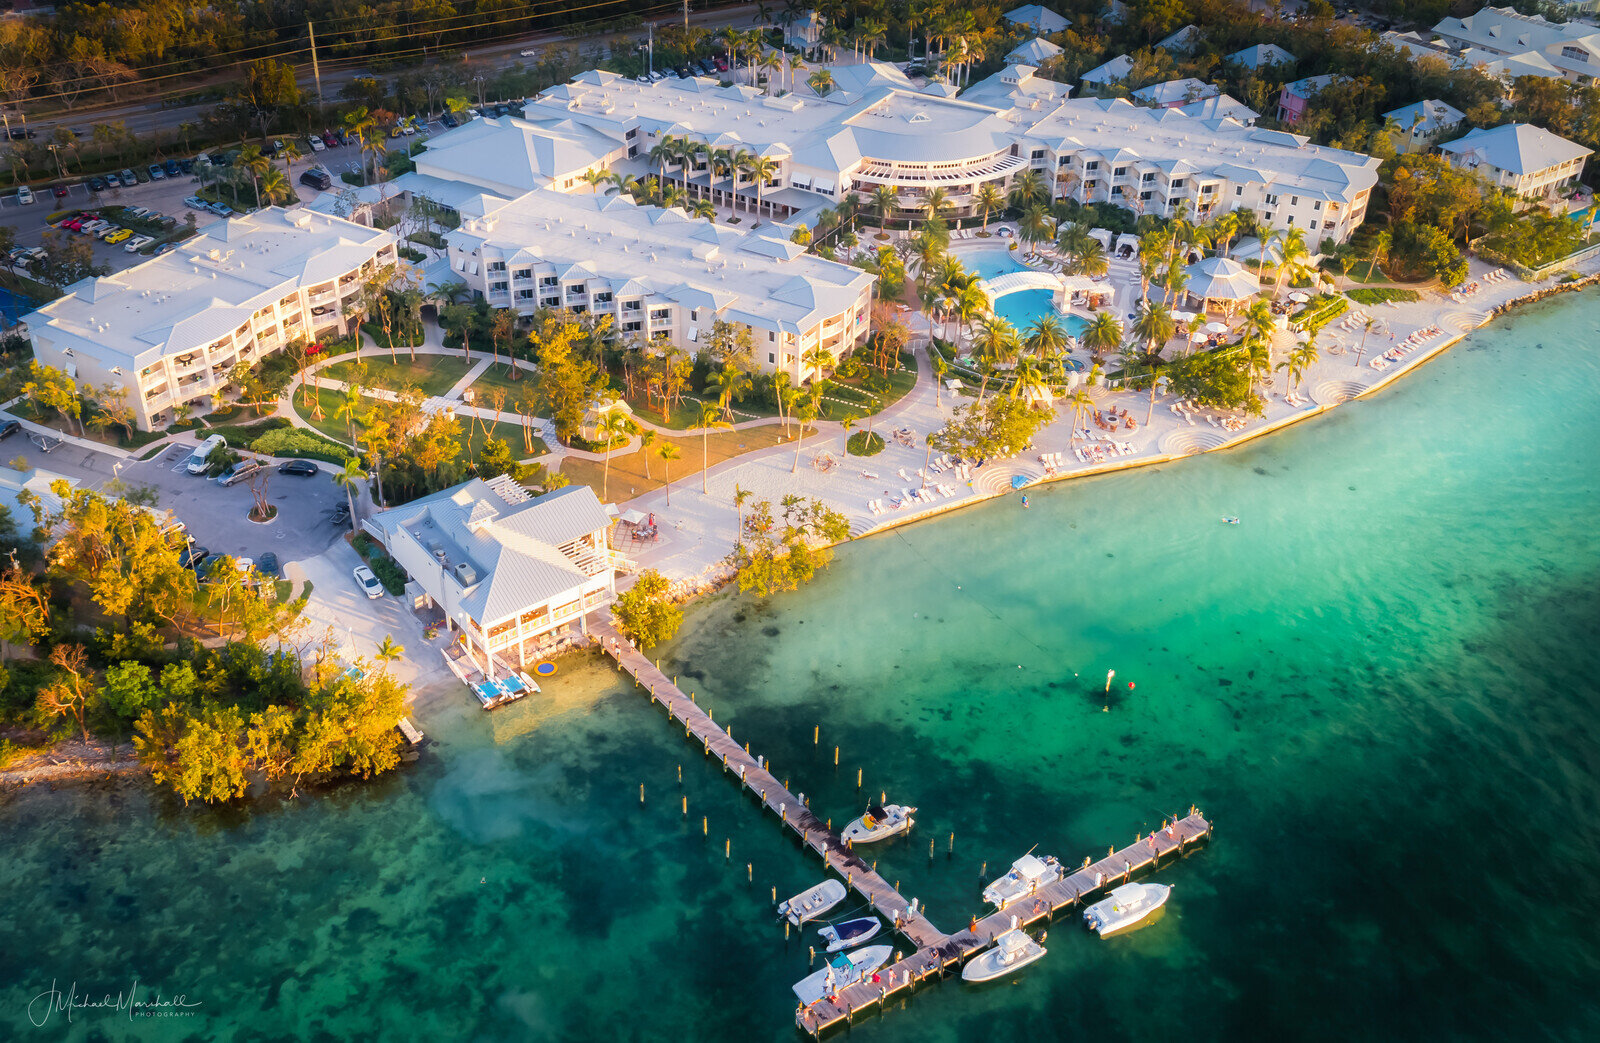 PLAYA LARGO RESORT & SPA, AUTOGRAPH COLLECTION aerial view